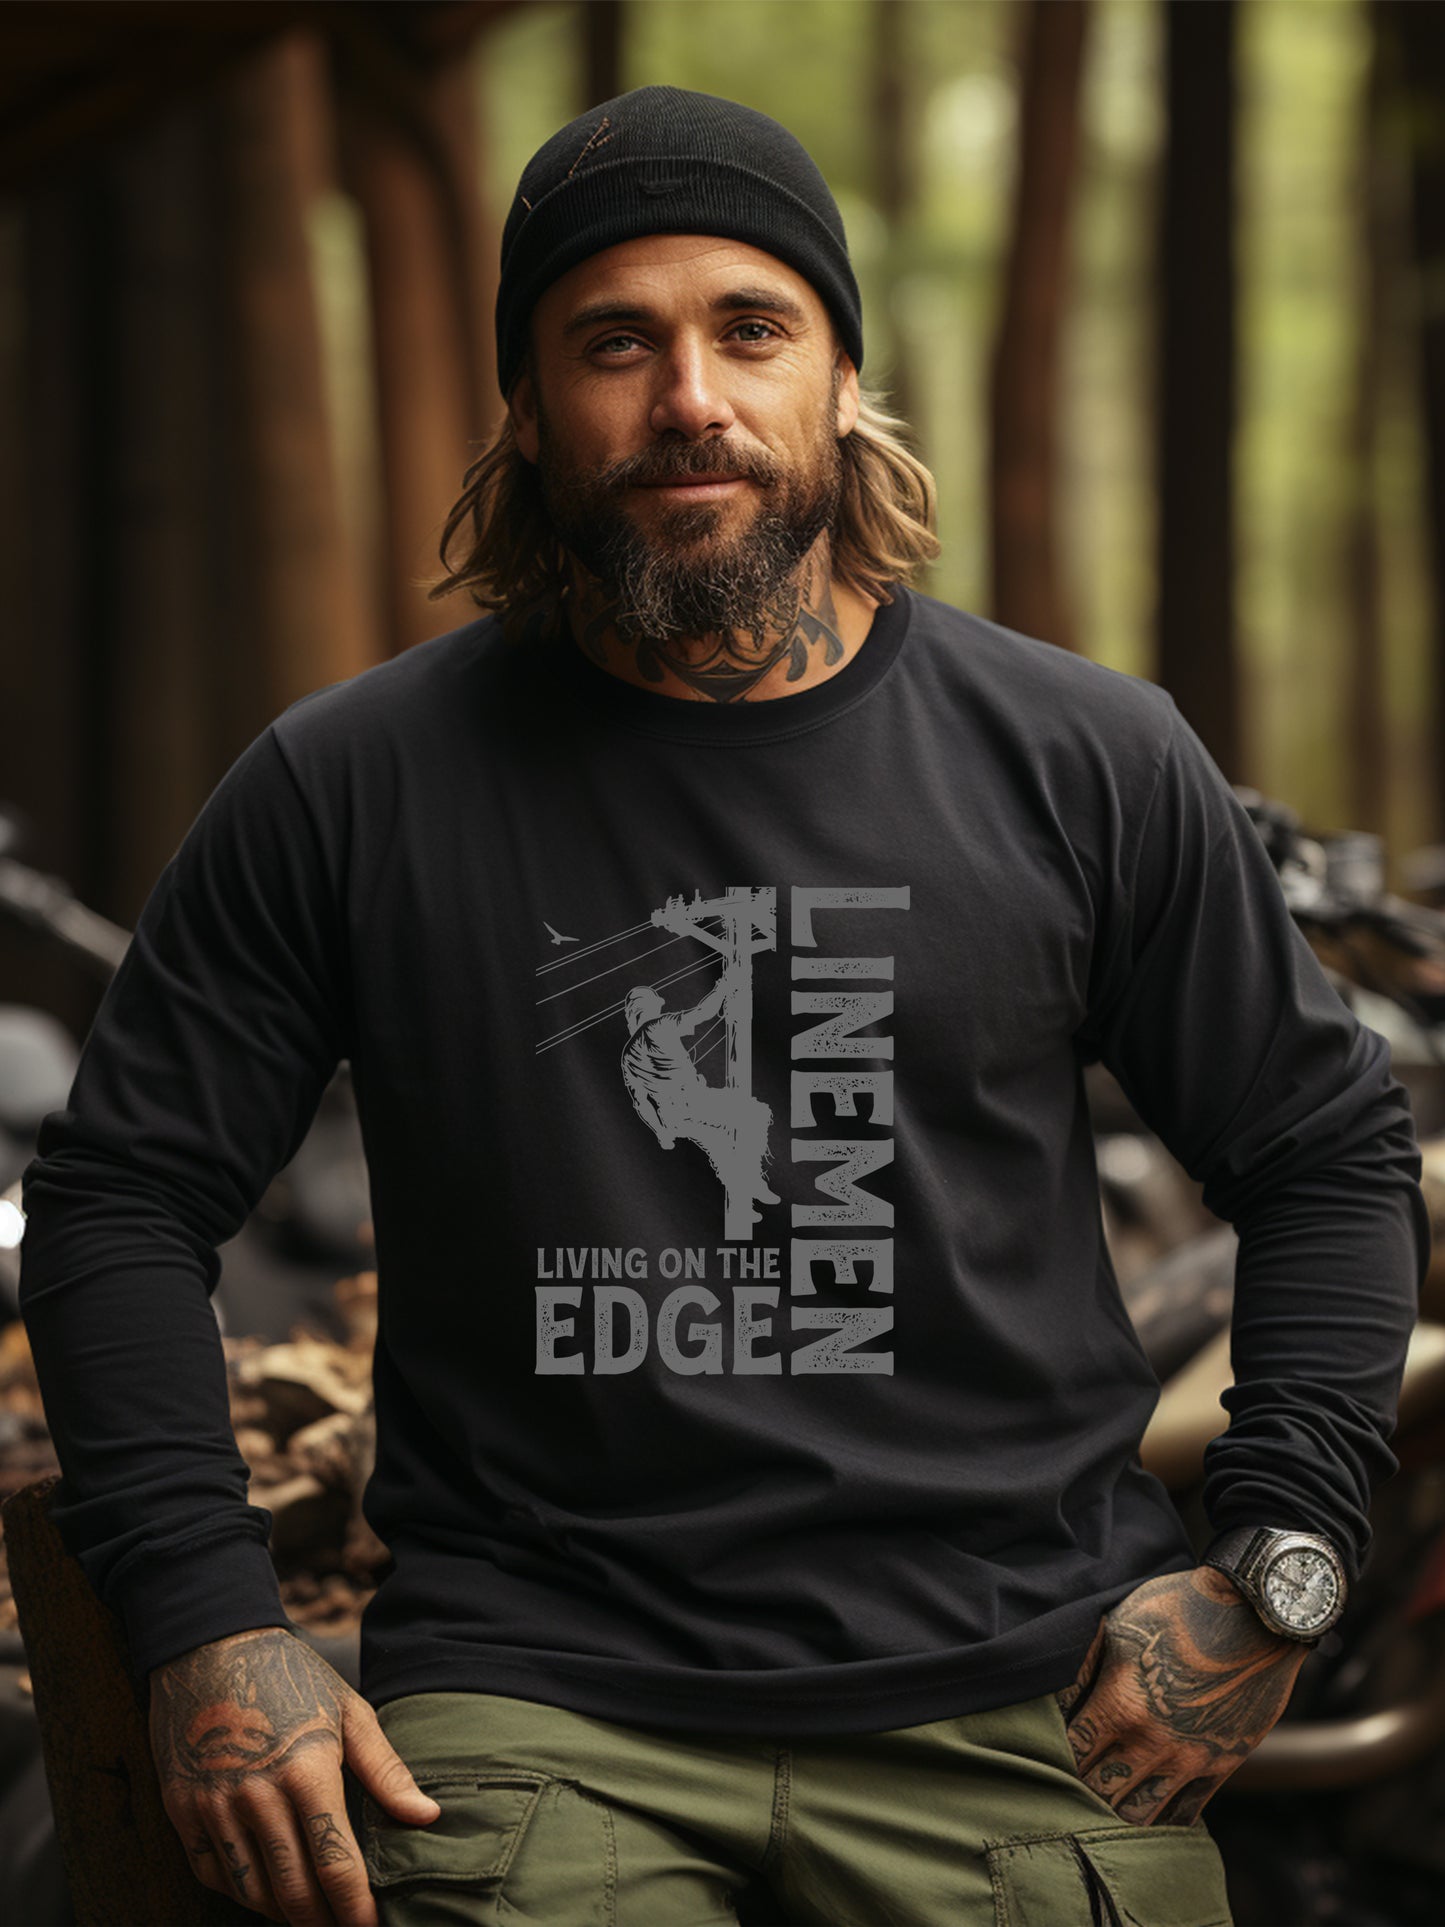 Lineman Living on the Edge - Ultra Cotton Relaxed Fit Long Sleeve Tee - Black